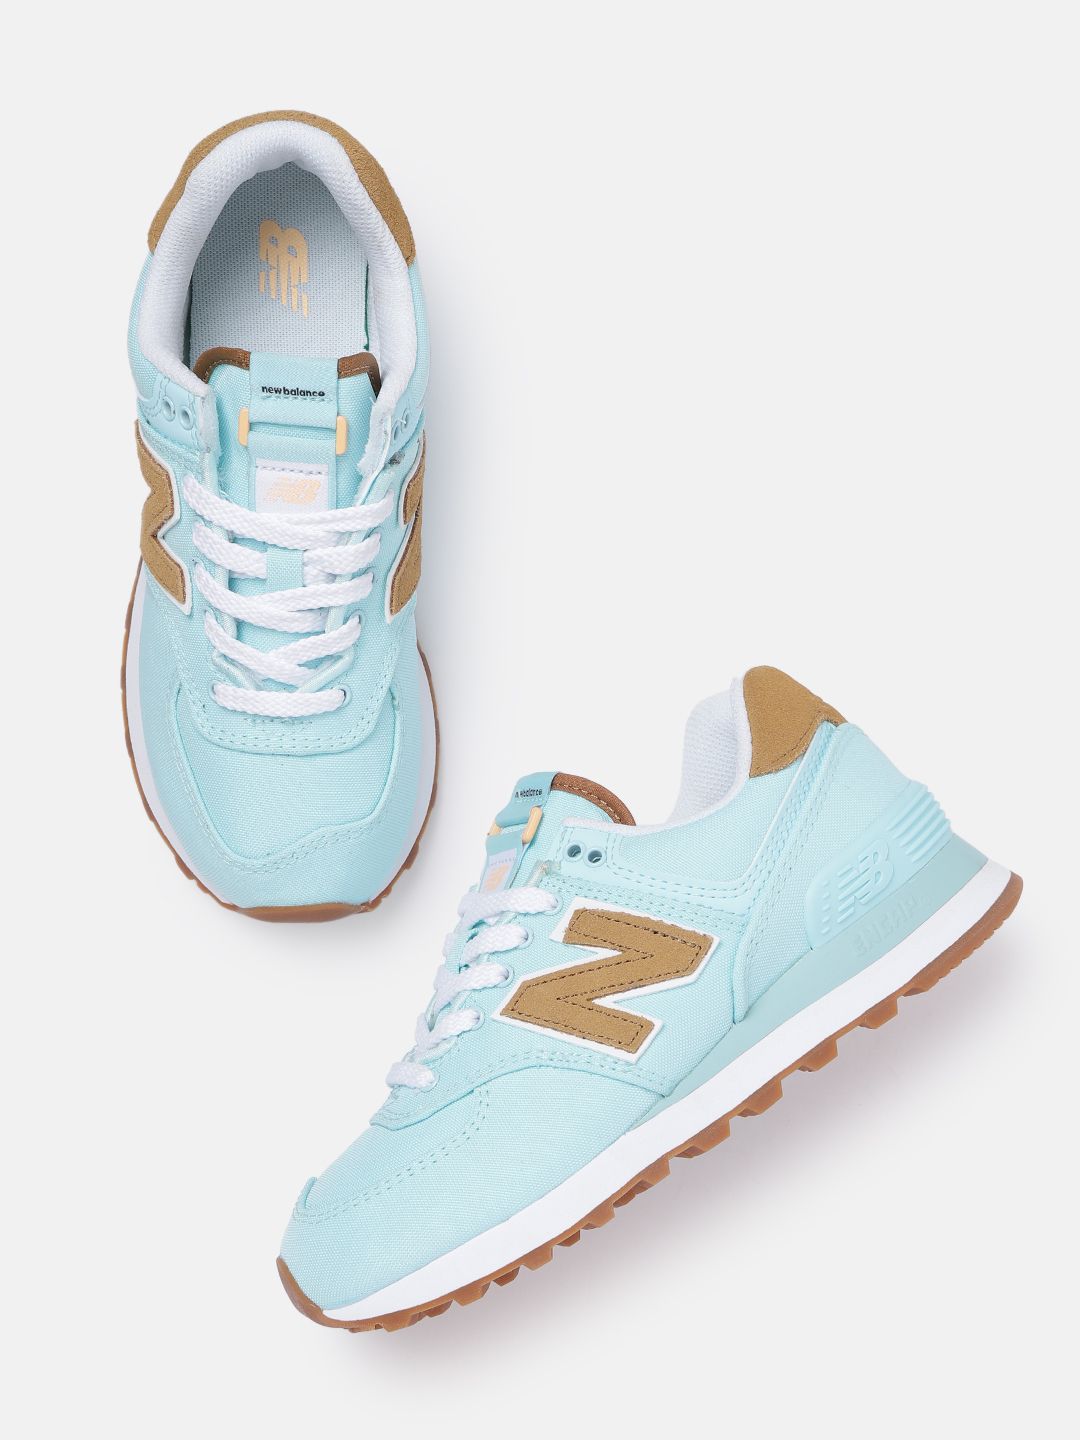 New Balance Women Blue Solid Suede Sneakers Price in India